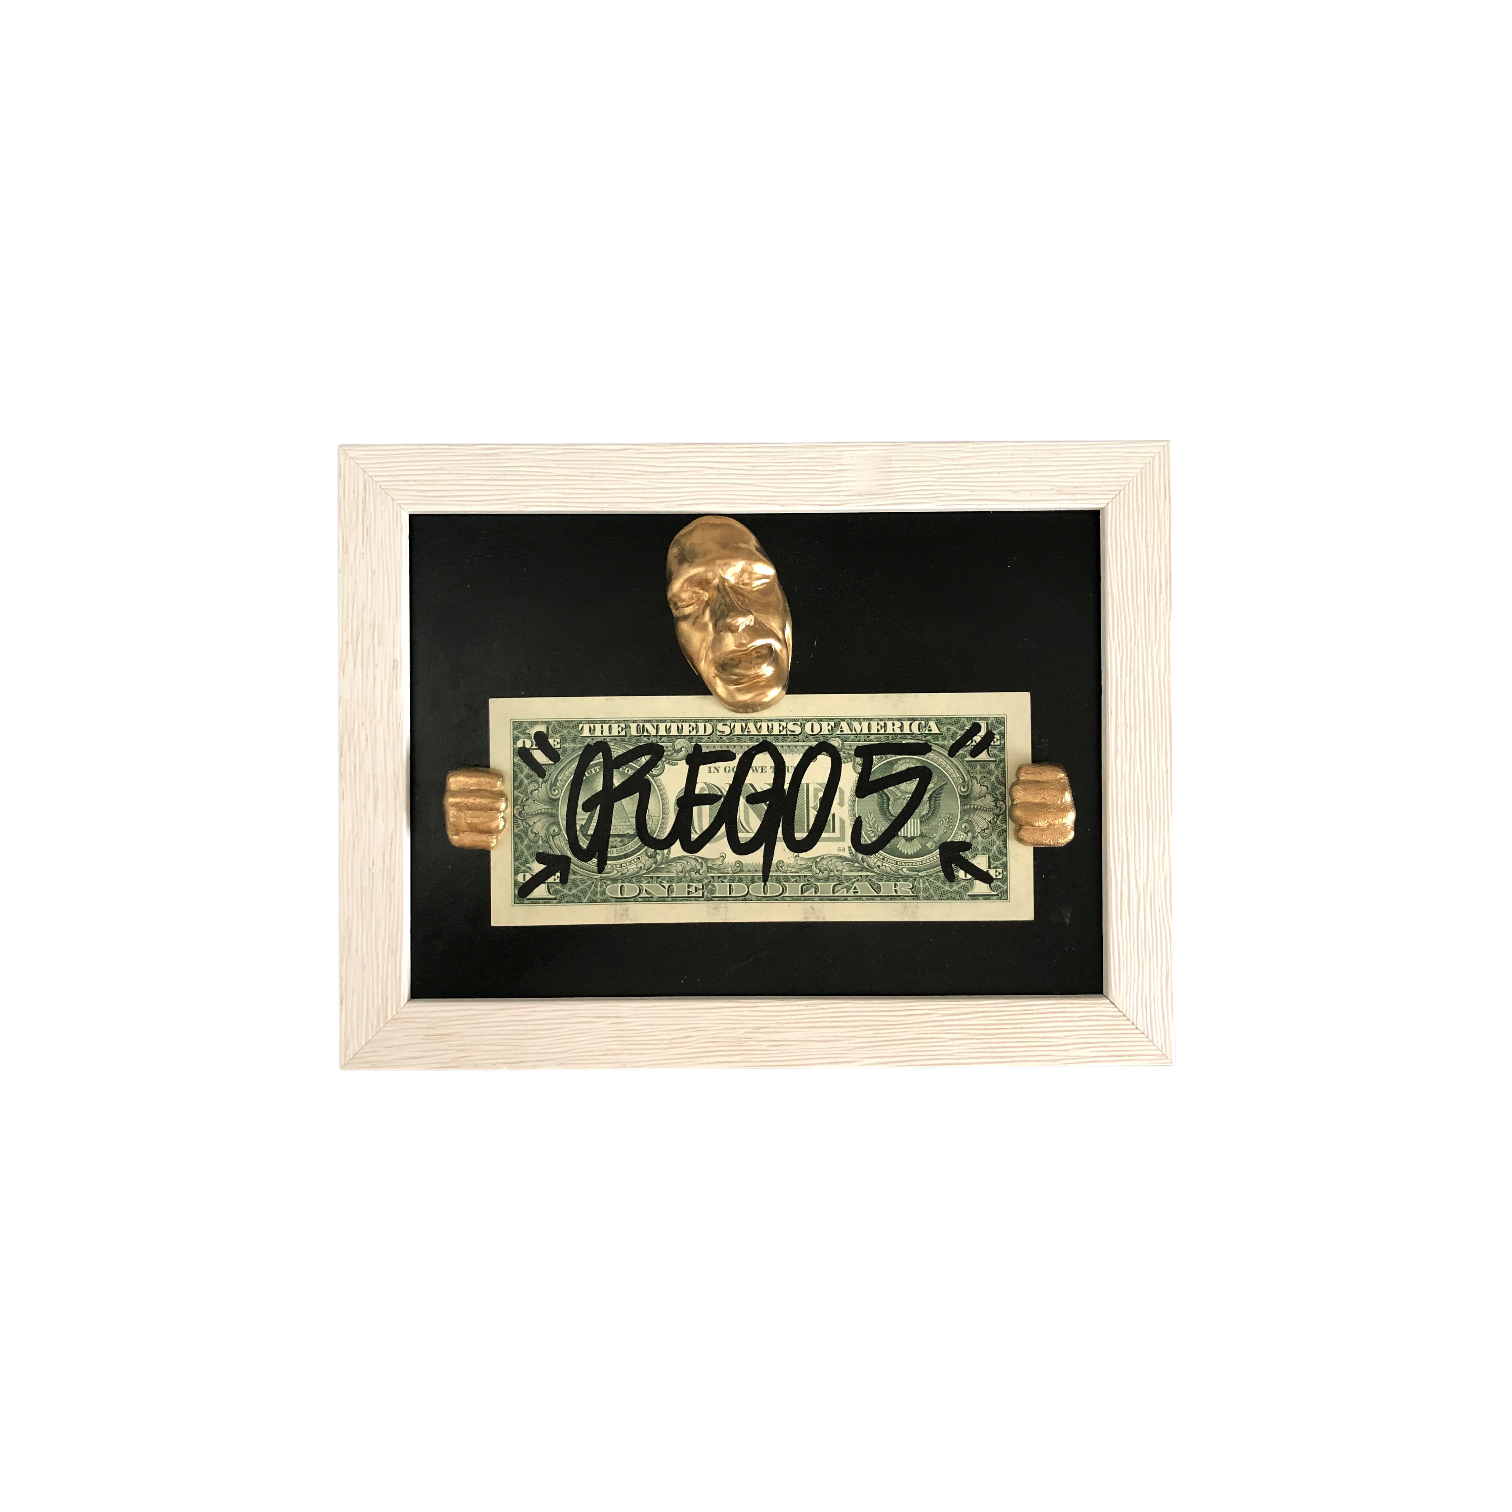 Gregos, See my dollar, 17x22 cm , Synthetic resin and acrylic, 1 dollar bill, on wood, 2021